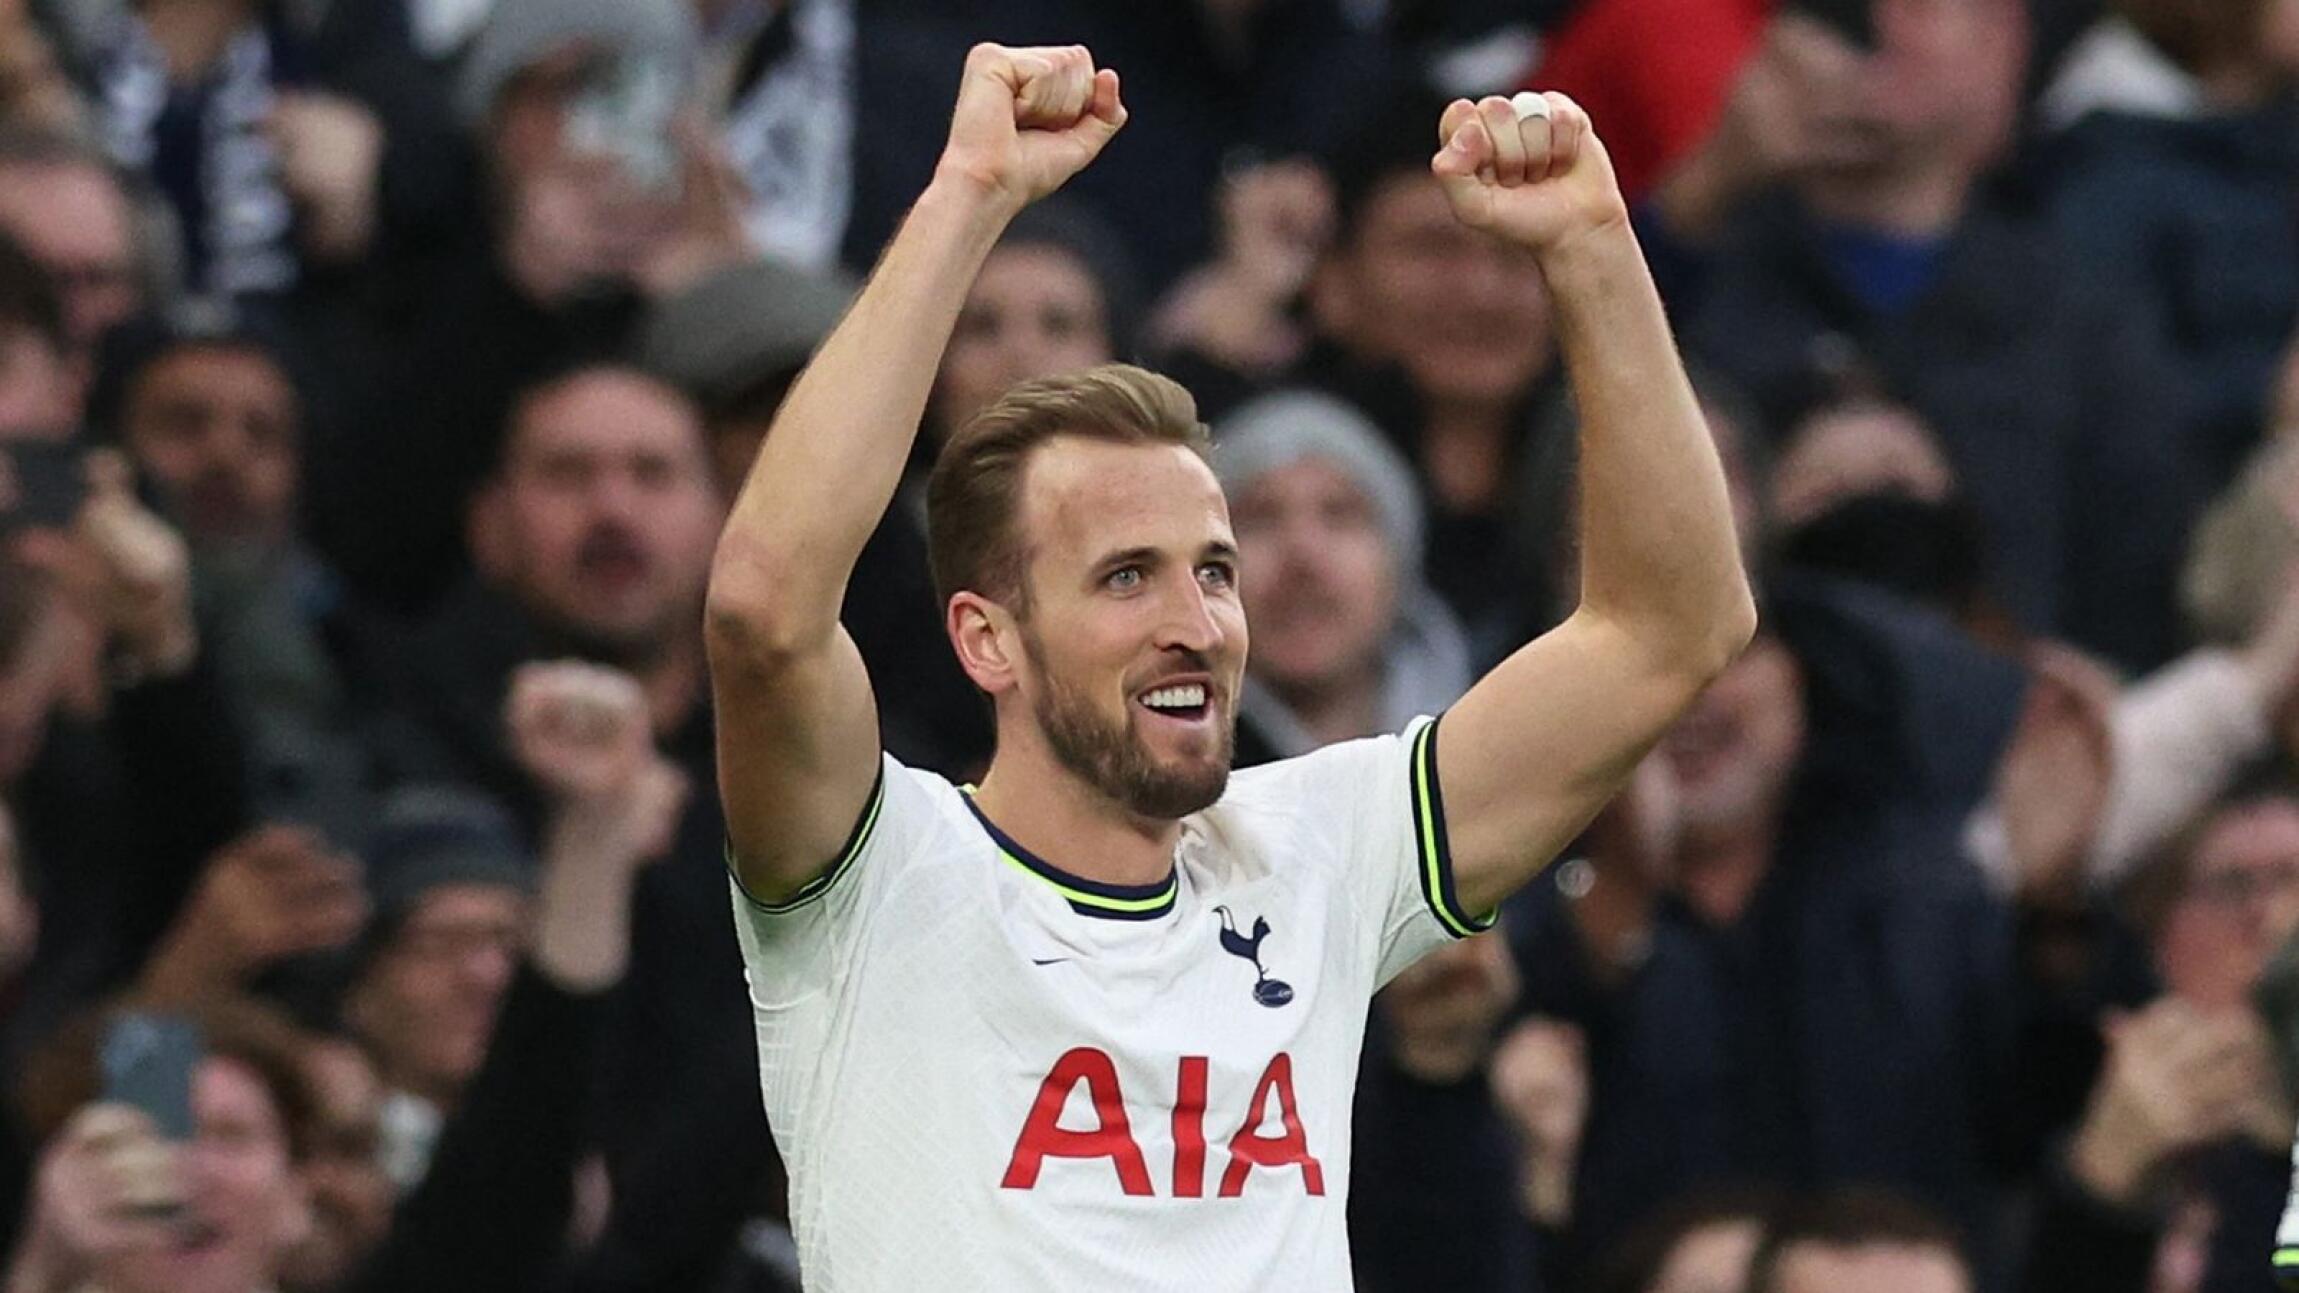 Tottenham Hotspur's Harry Kane celebrates after scoring the winning goal against Manchester City, and the club’s all time top goalscorer on Sunday